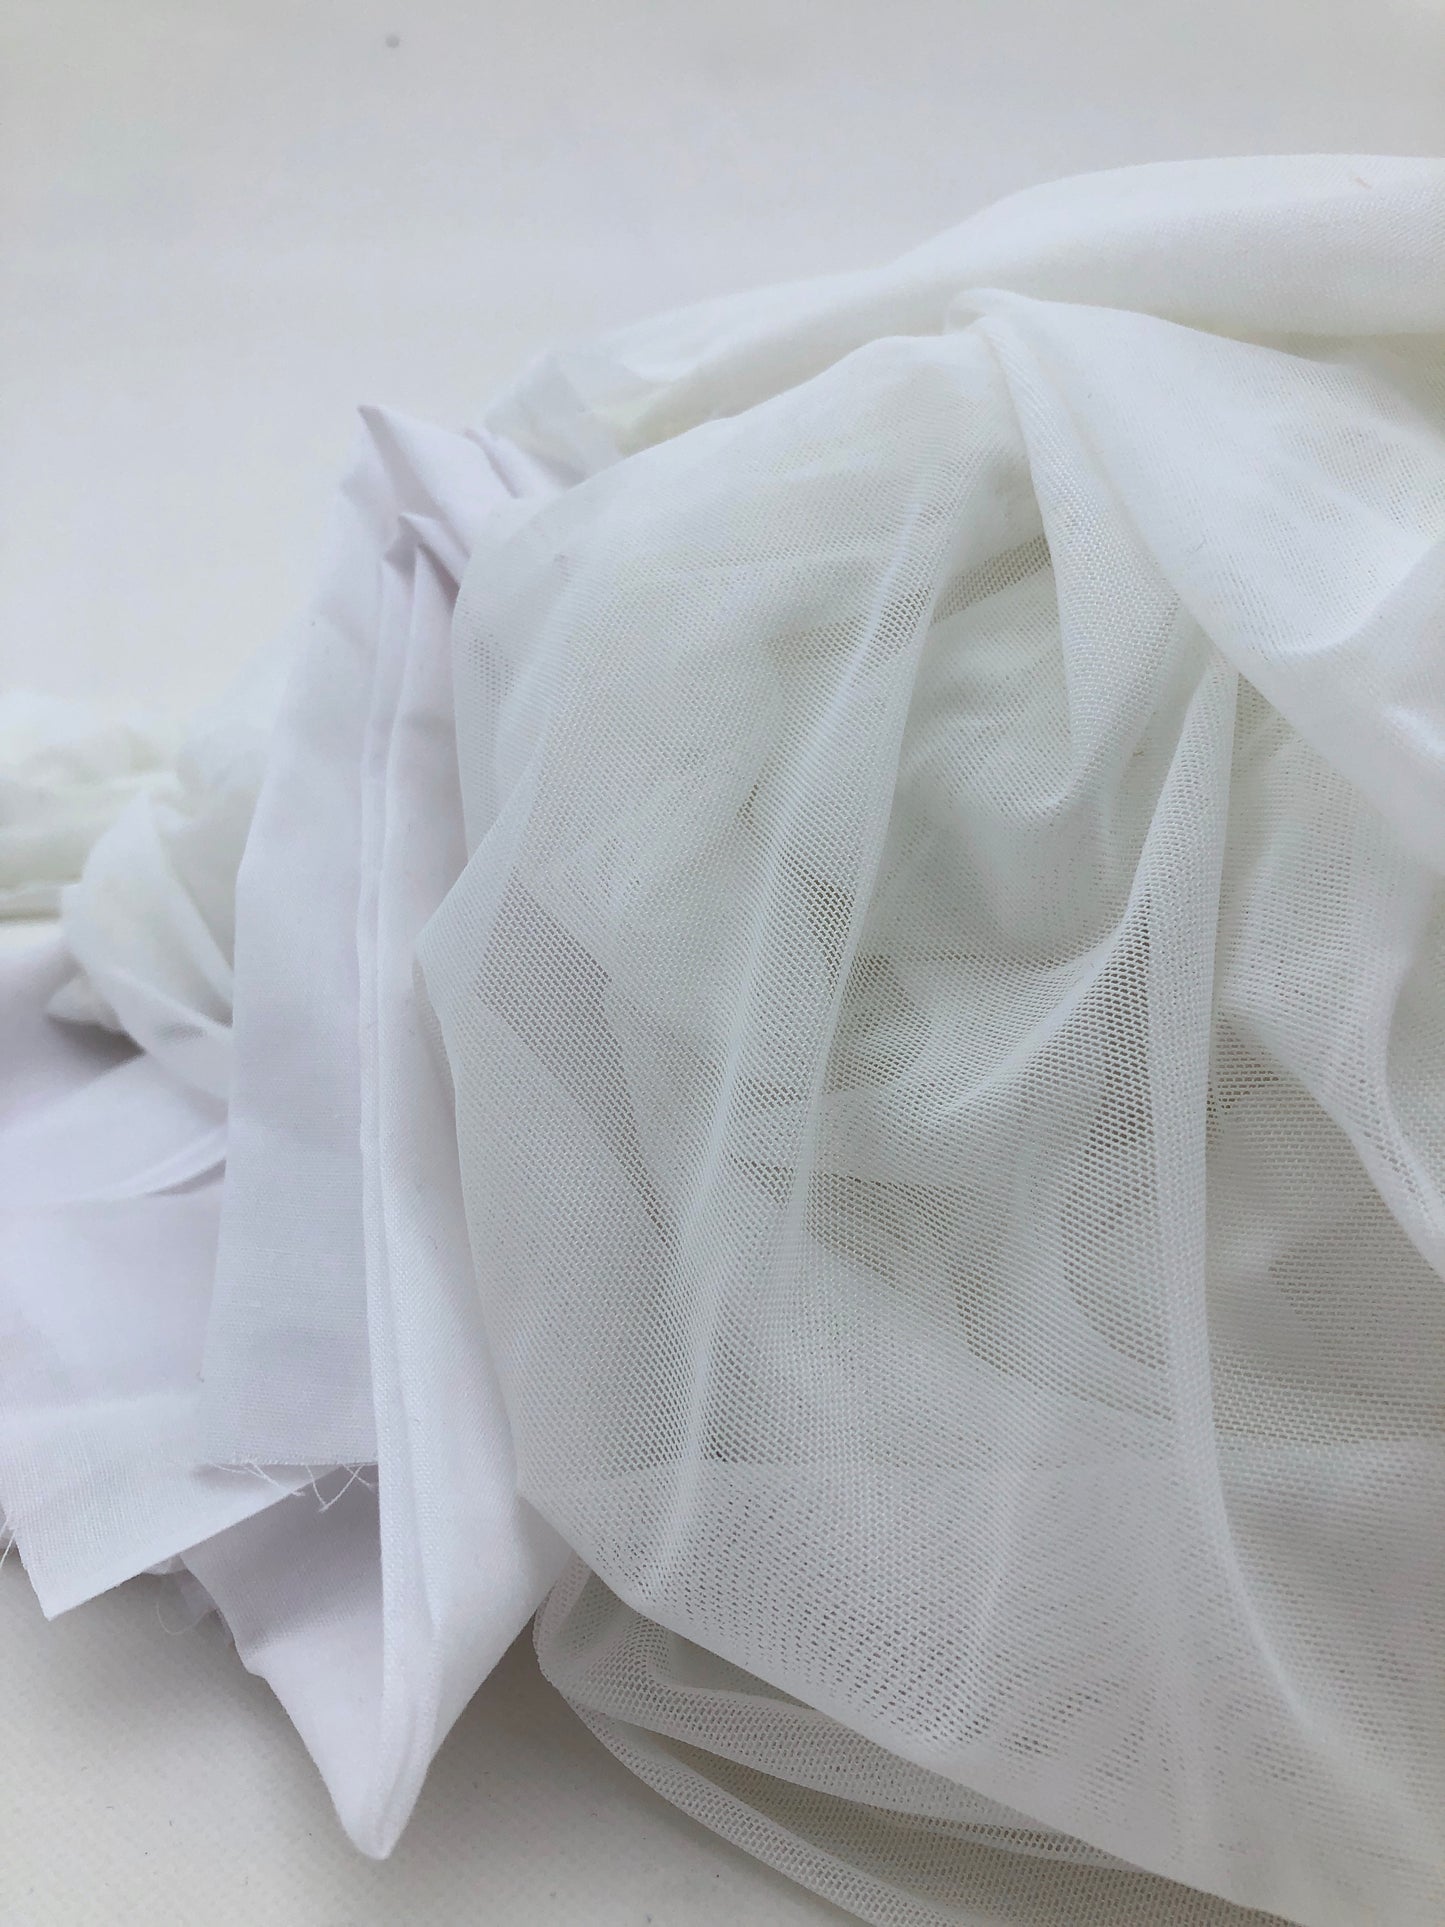 Fabric Pieces, Synthetic Fiber, White